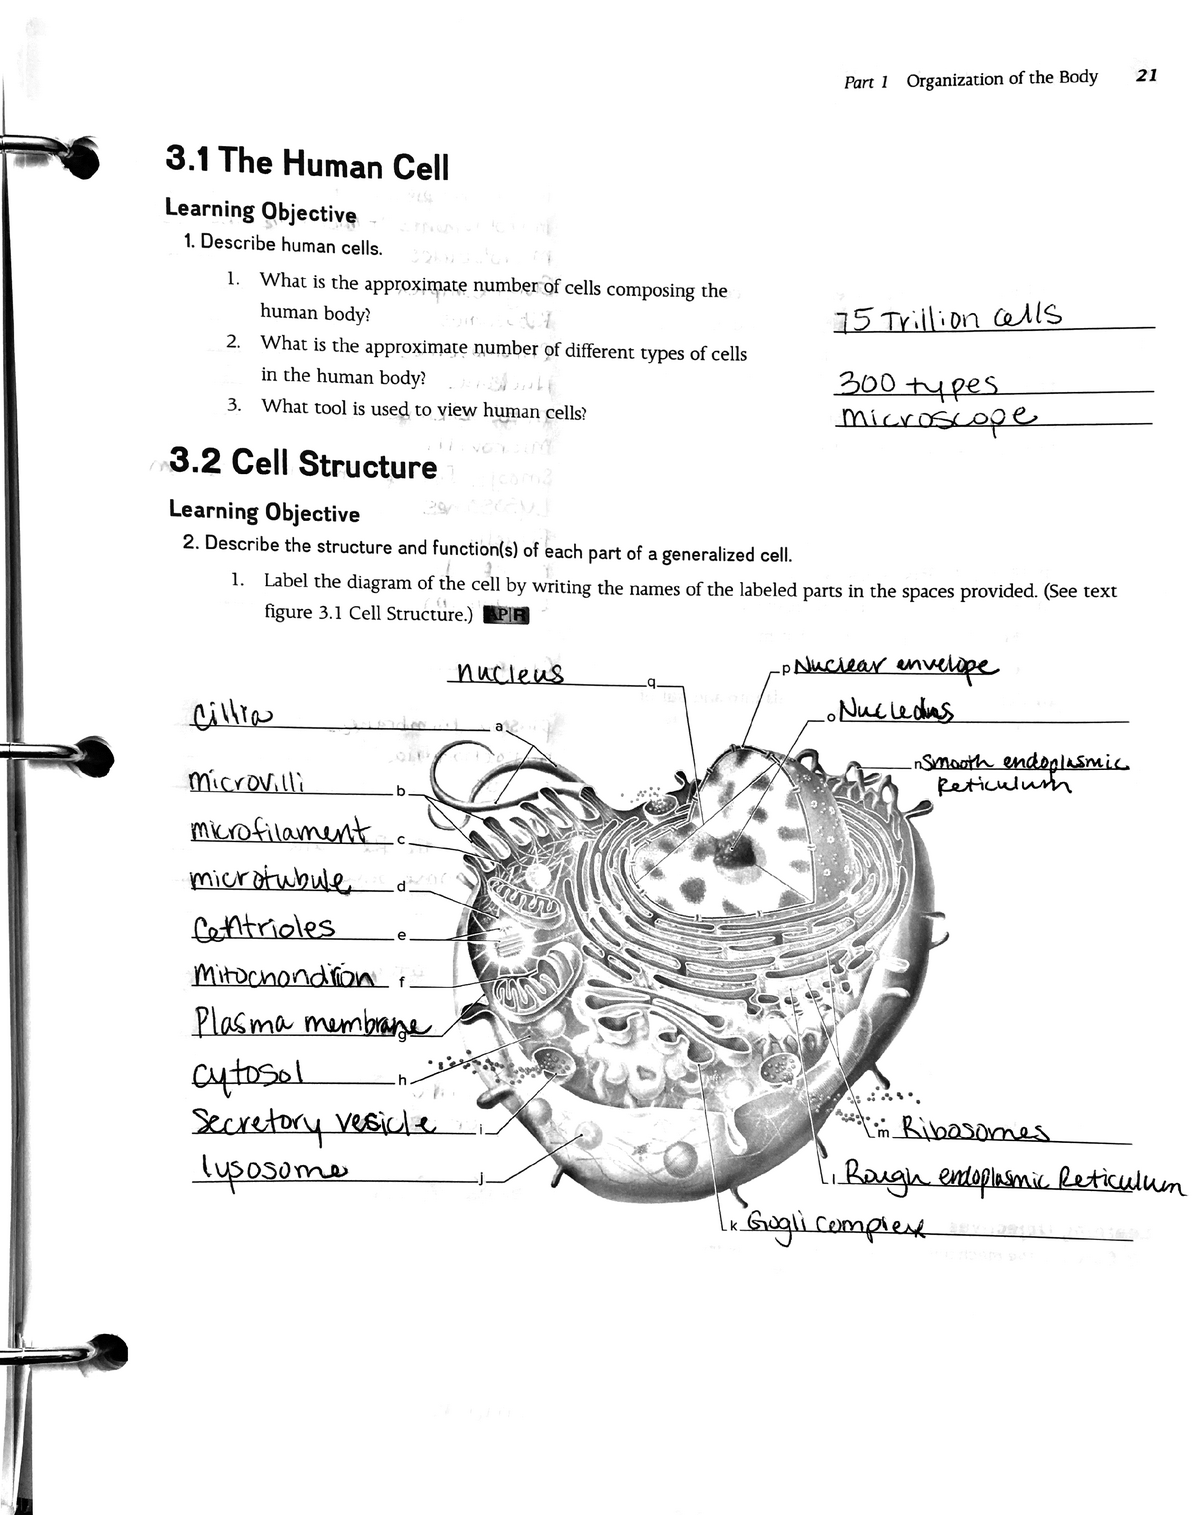 Anatomy Of Generalized Cell